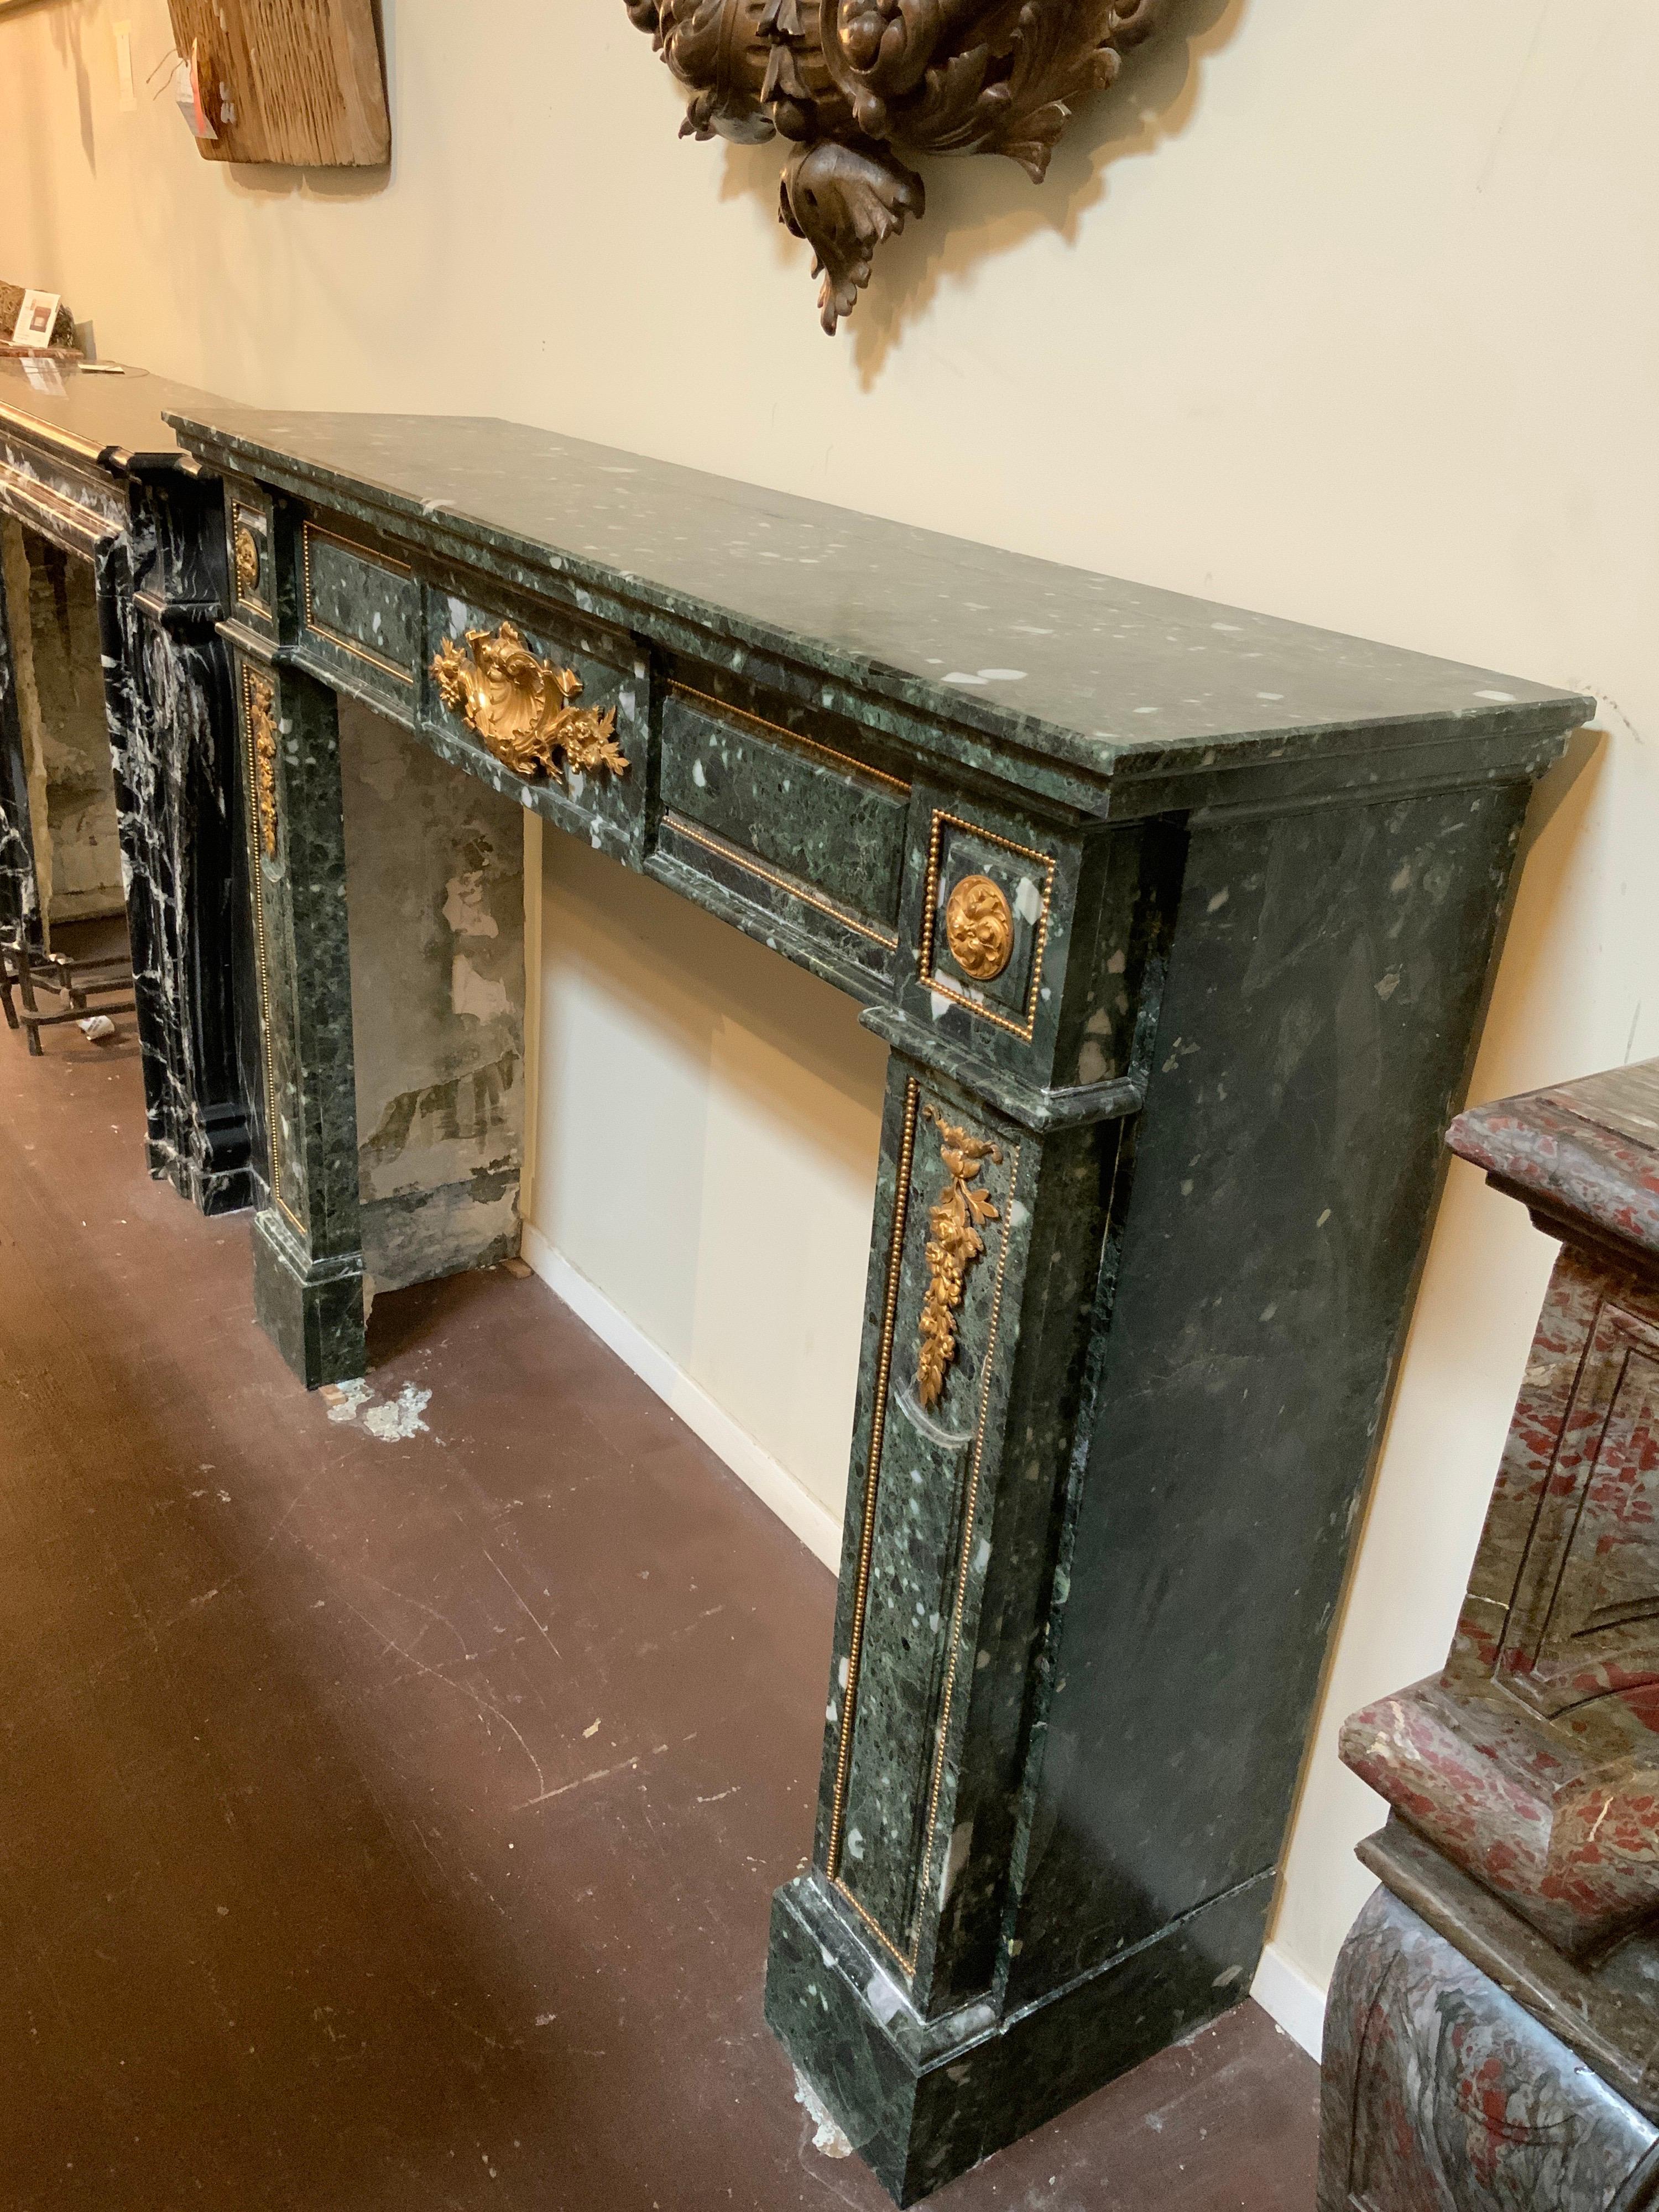 This Empire style marble mantel origins from France, circa 1880.

Firebox measurements: 43.50